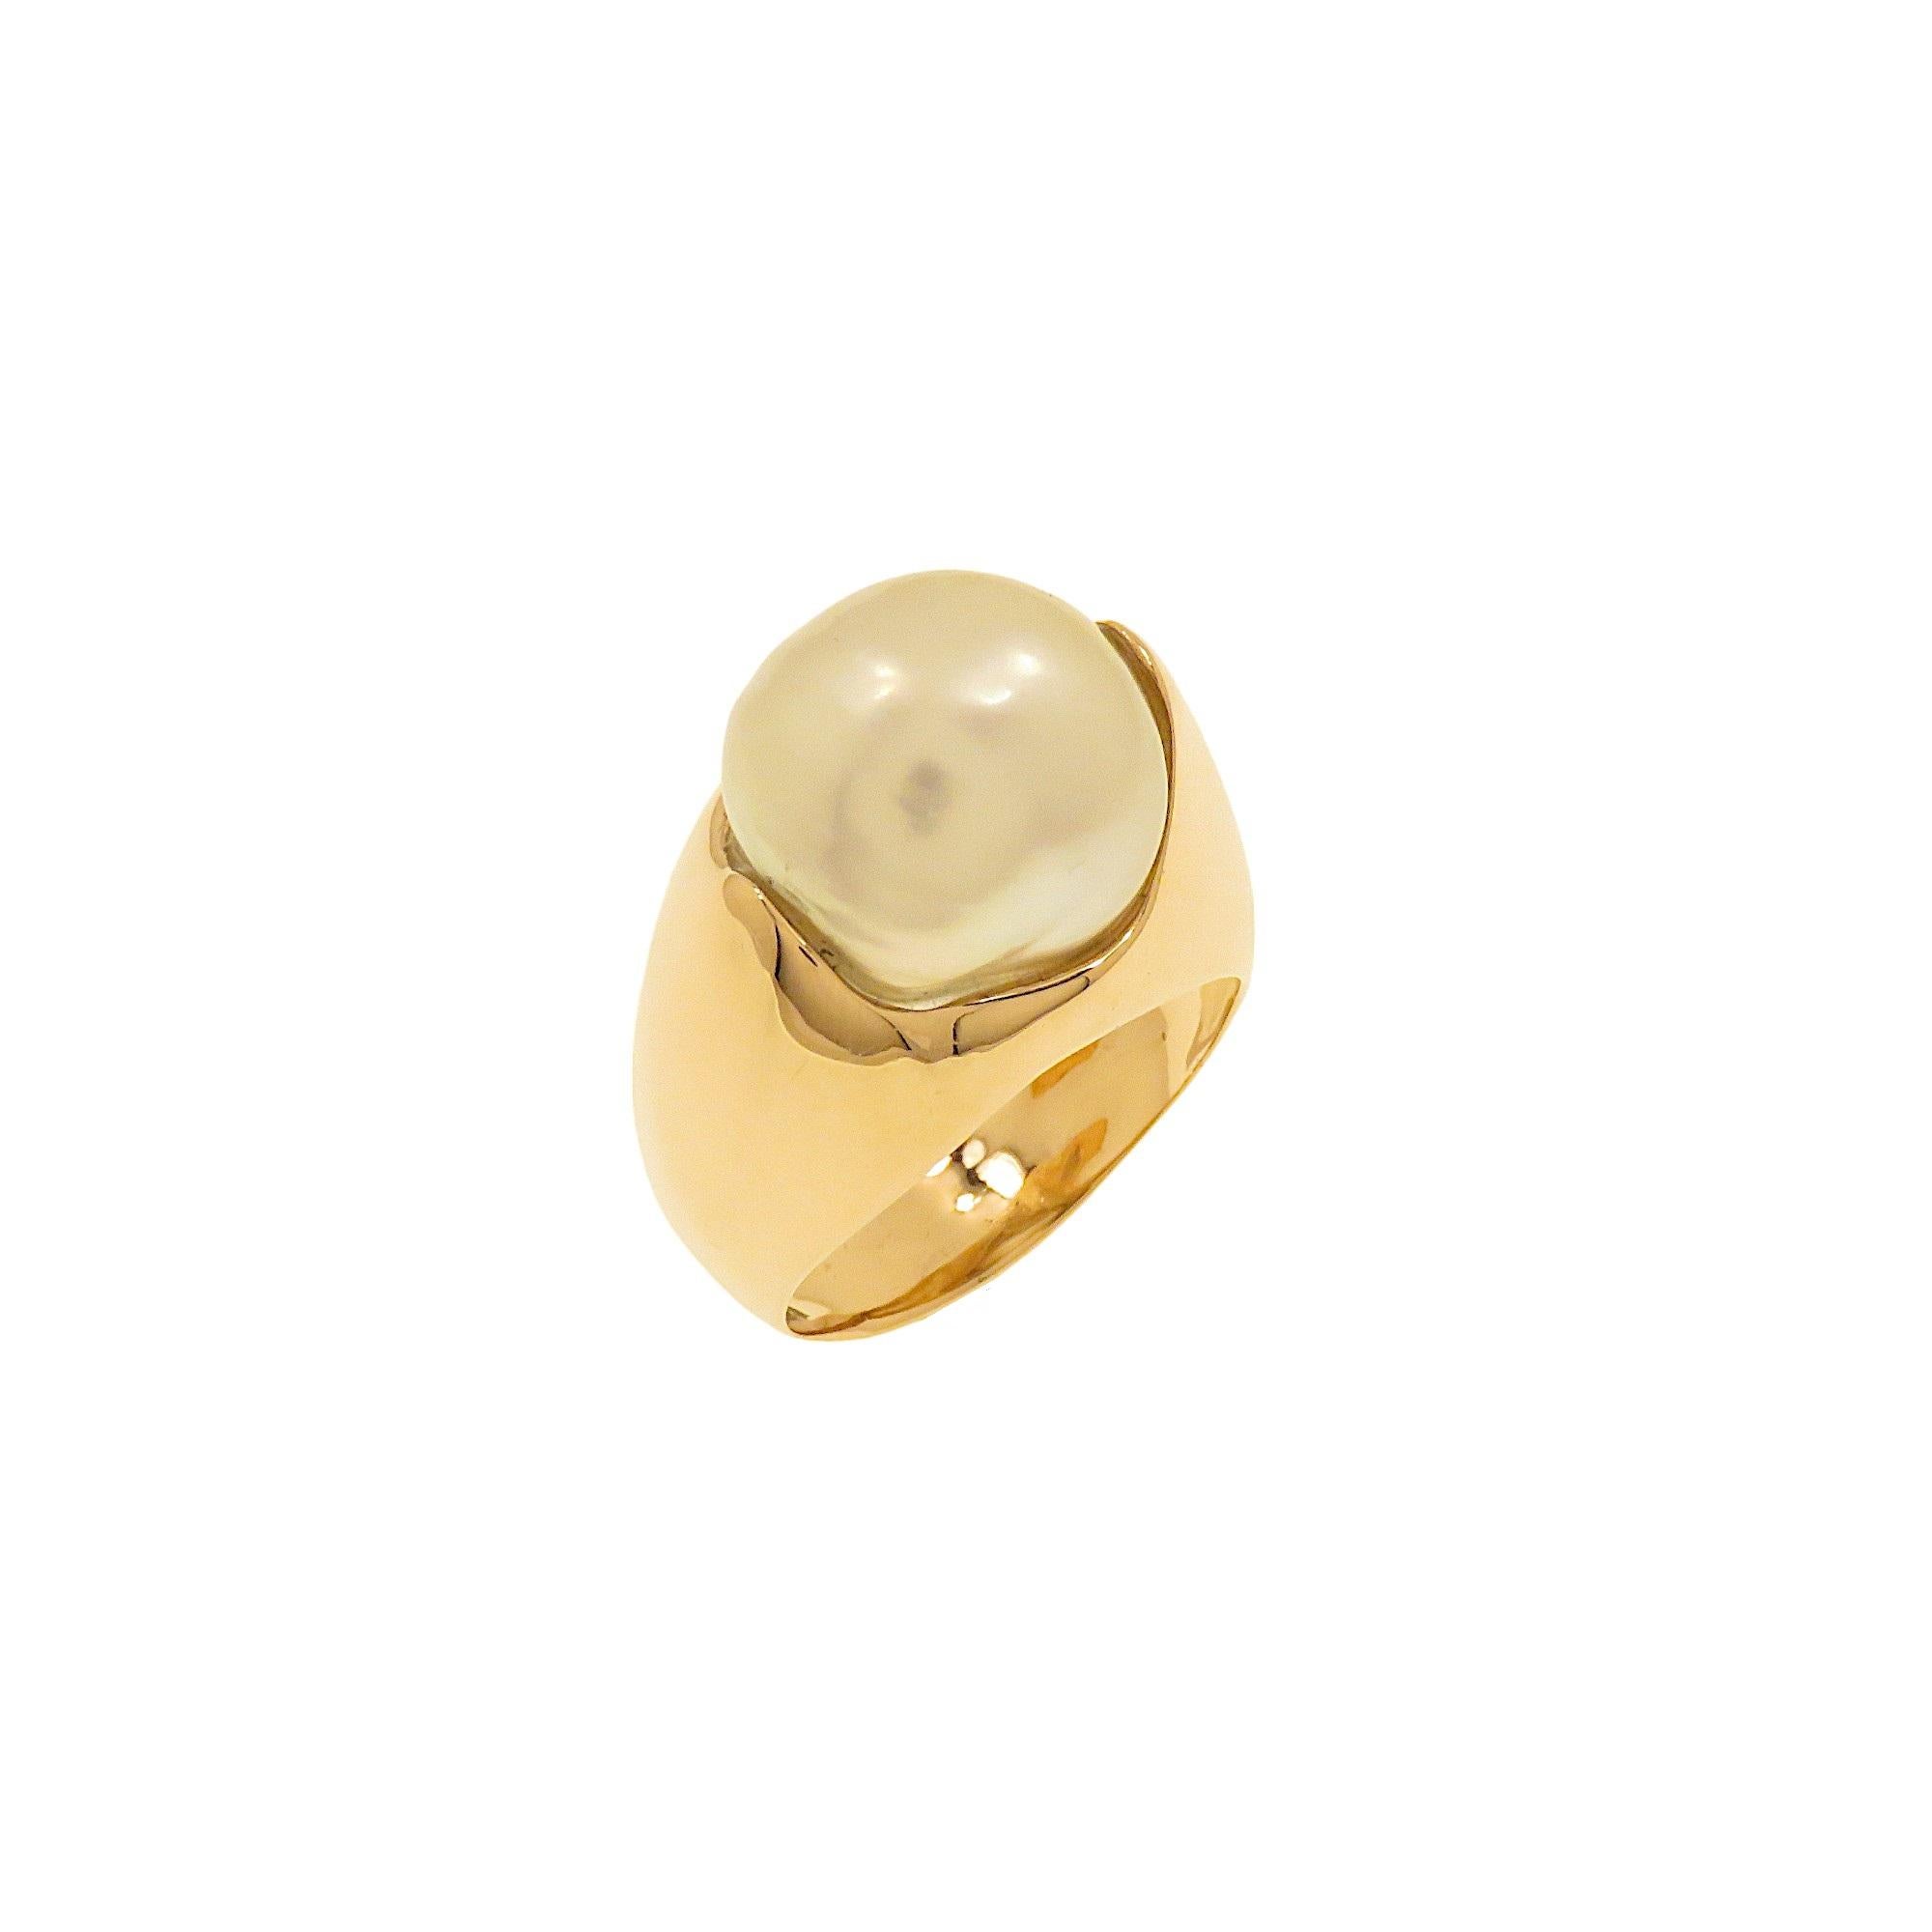 Botta jewelry ring with Australian pearl in rose gold For Sale 1